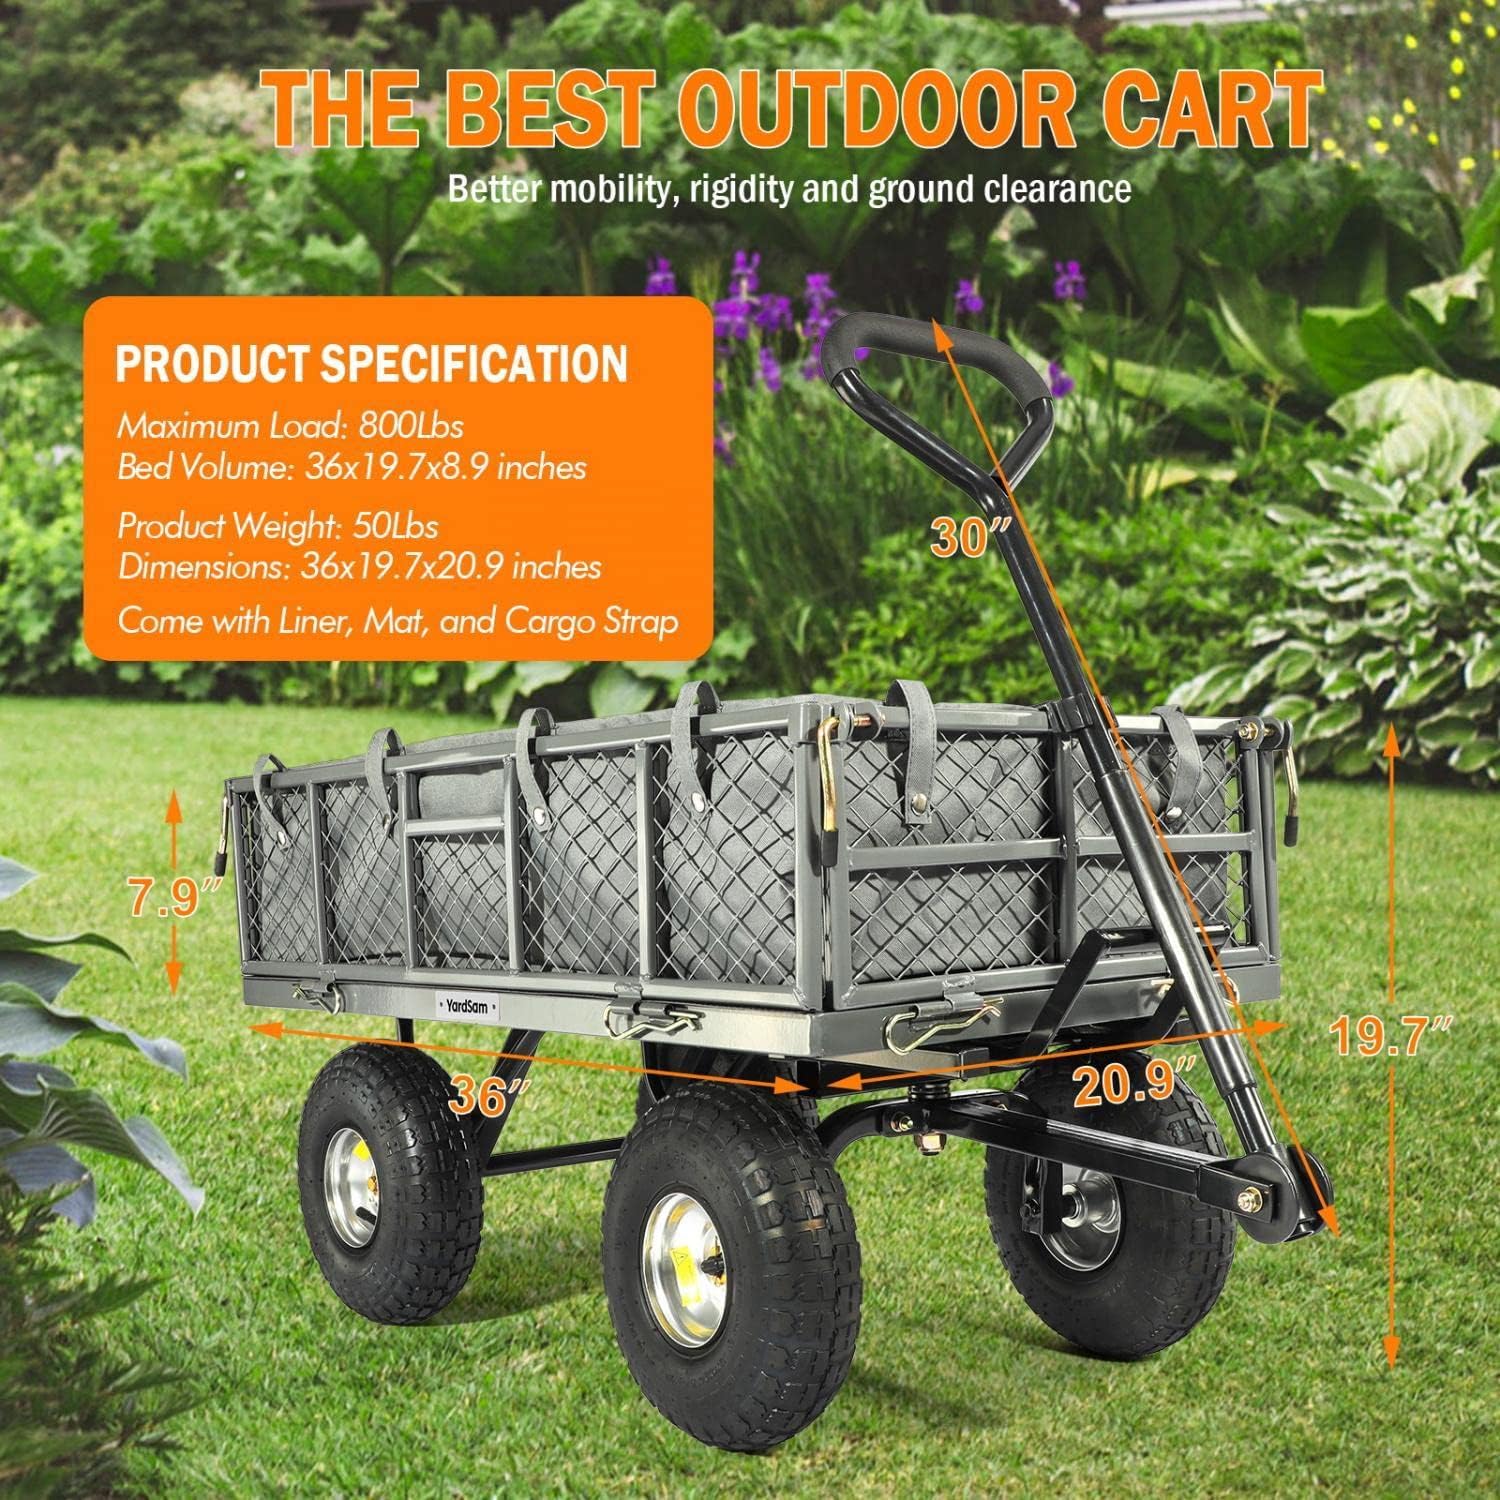 Yardsam Dump Garden Carts 800 lb Capacity, Heavy Duty Steel Garden Carts and Wagons with Removable Sides, Pullable Handles, 10in All-Terrain Wheels, Utility Liner, for Garden Lawn Yard Farm, Grey